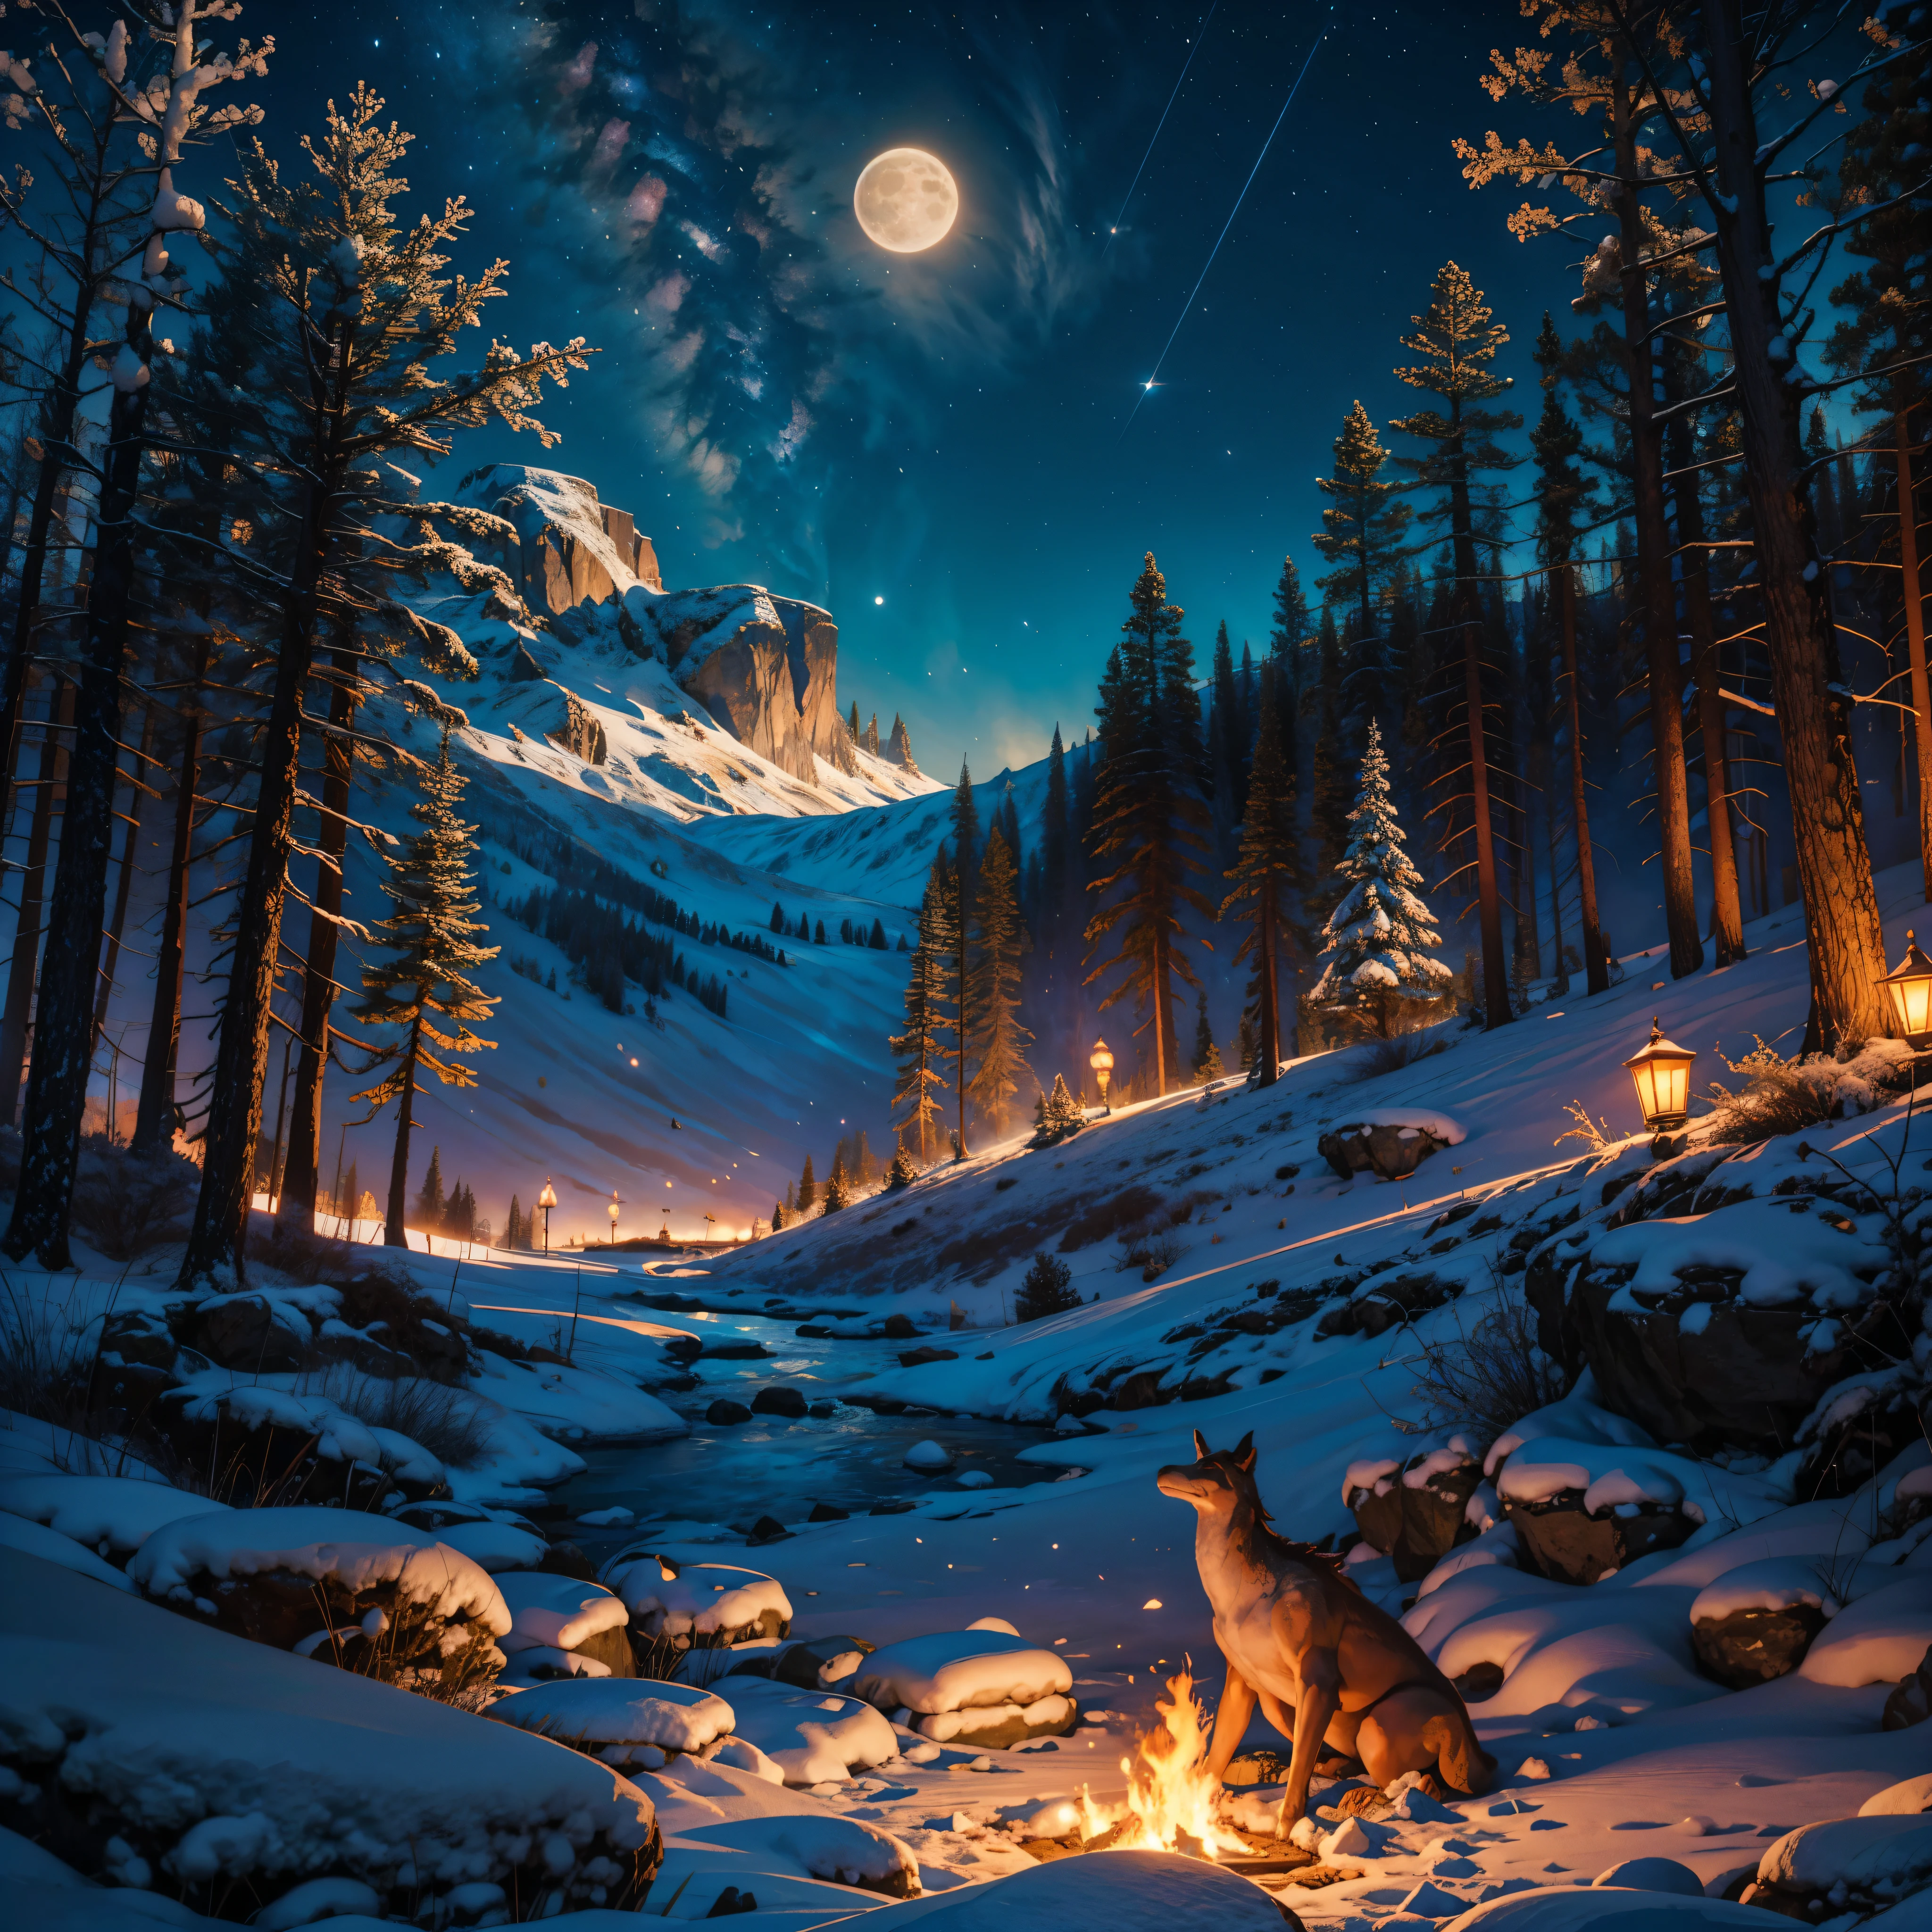 The dragon sleeps in the forest, curled up in a kolachik,lying on its belly, The head lies on the snow nebulae hyper Nebula Moonrise epic moonset panoramic moonshine Unrealengine5 ultra masterpiece meticulously intricate ultra_high-details ultra_high-def ultra_high-res ultra_high-quality optimal ultra_sharpness ultra_photo-realistic ethereal_beauty fantasy_illustration:1.3 enchanting_gaze otherworldly_charm mystical_sky deep path equirectangular moonlit_night detailed_cloudscape:1.3 batlying_in_the_sky_background bat thong beholder legs_dangling_above_lava glowing_torches long_leges cgi vfx sfx reflex Octane_rendered extreme improved UHD focus XT3 accurate DSLR HDR romm rgb pbr 3dcg fxaa blay vivid colors-coded anti-aliasing fkaa txaa rtx ssao opengl-shaders glsl-shaders post-processing post-production cell-shading tone-mapping perfection volumetric Lightning contrast Cinematic moonlight backlight global illumination sunflower luminescence Crystalline varies multi etc. --s 1000 --c 20 --q 20 --chaos 100